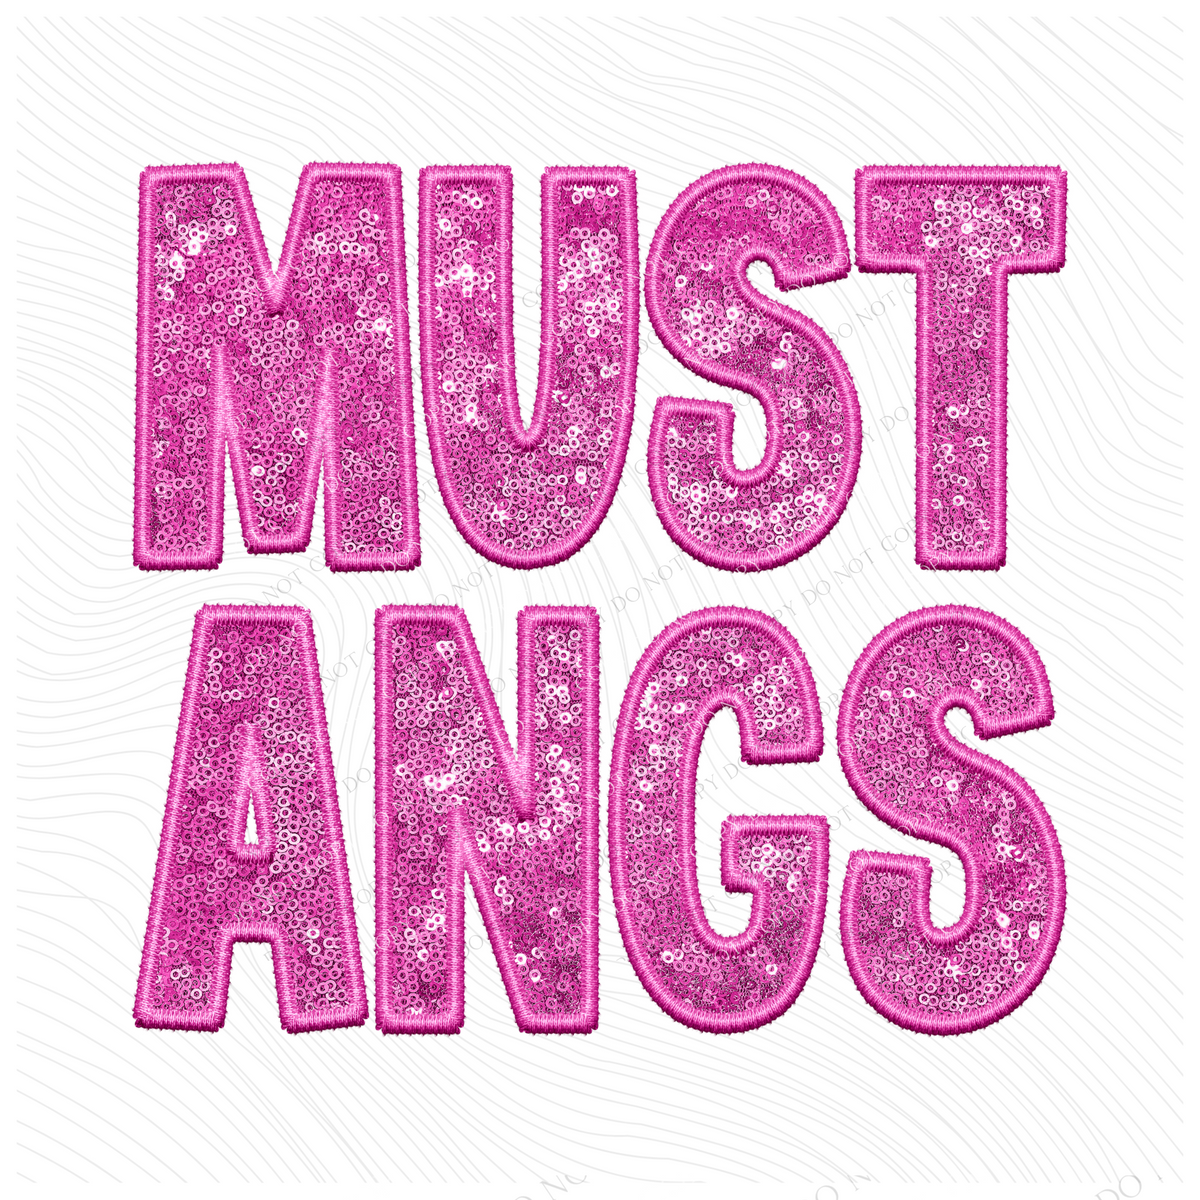 Mustangs Embroidery & Sequin in Pink Mascot Digital Design, PNG